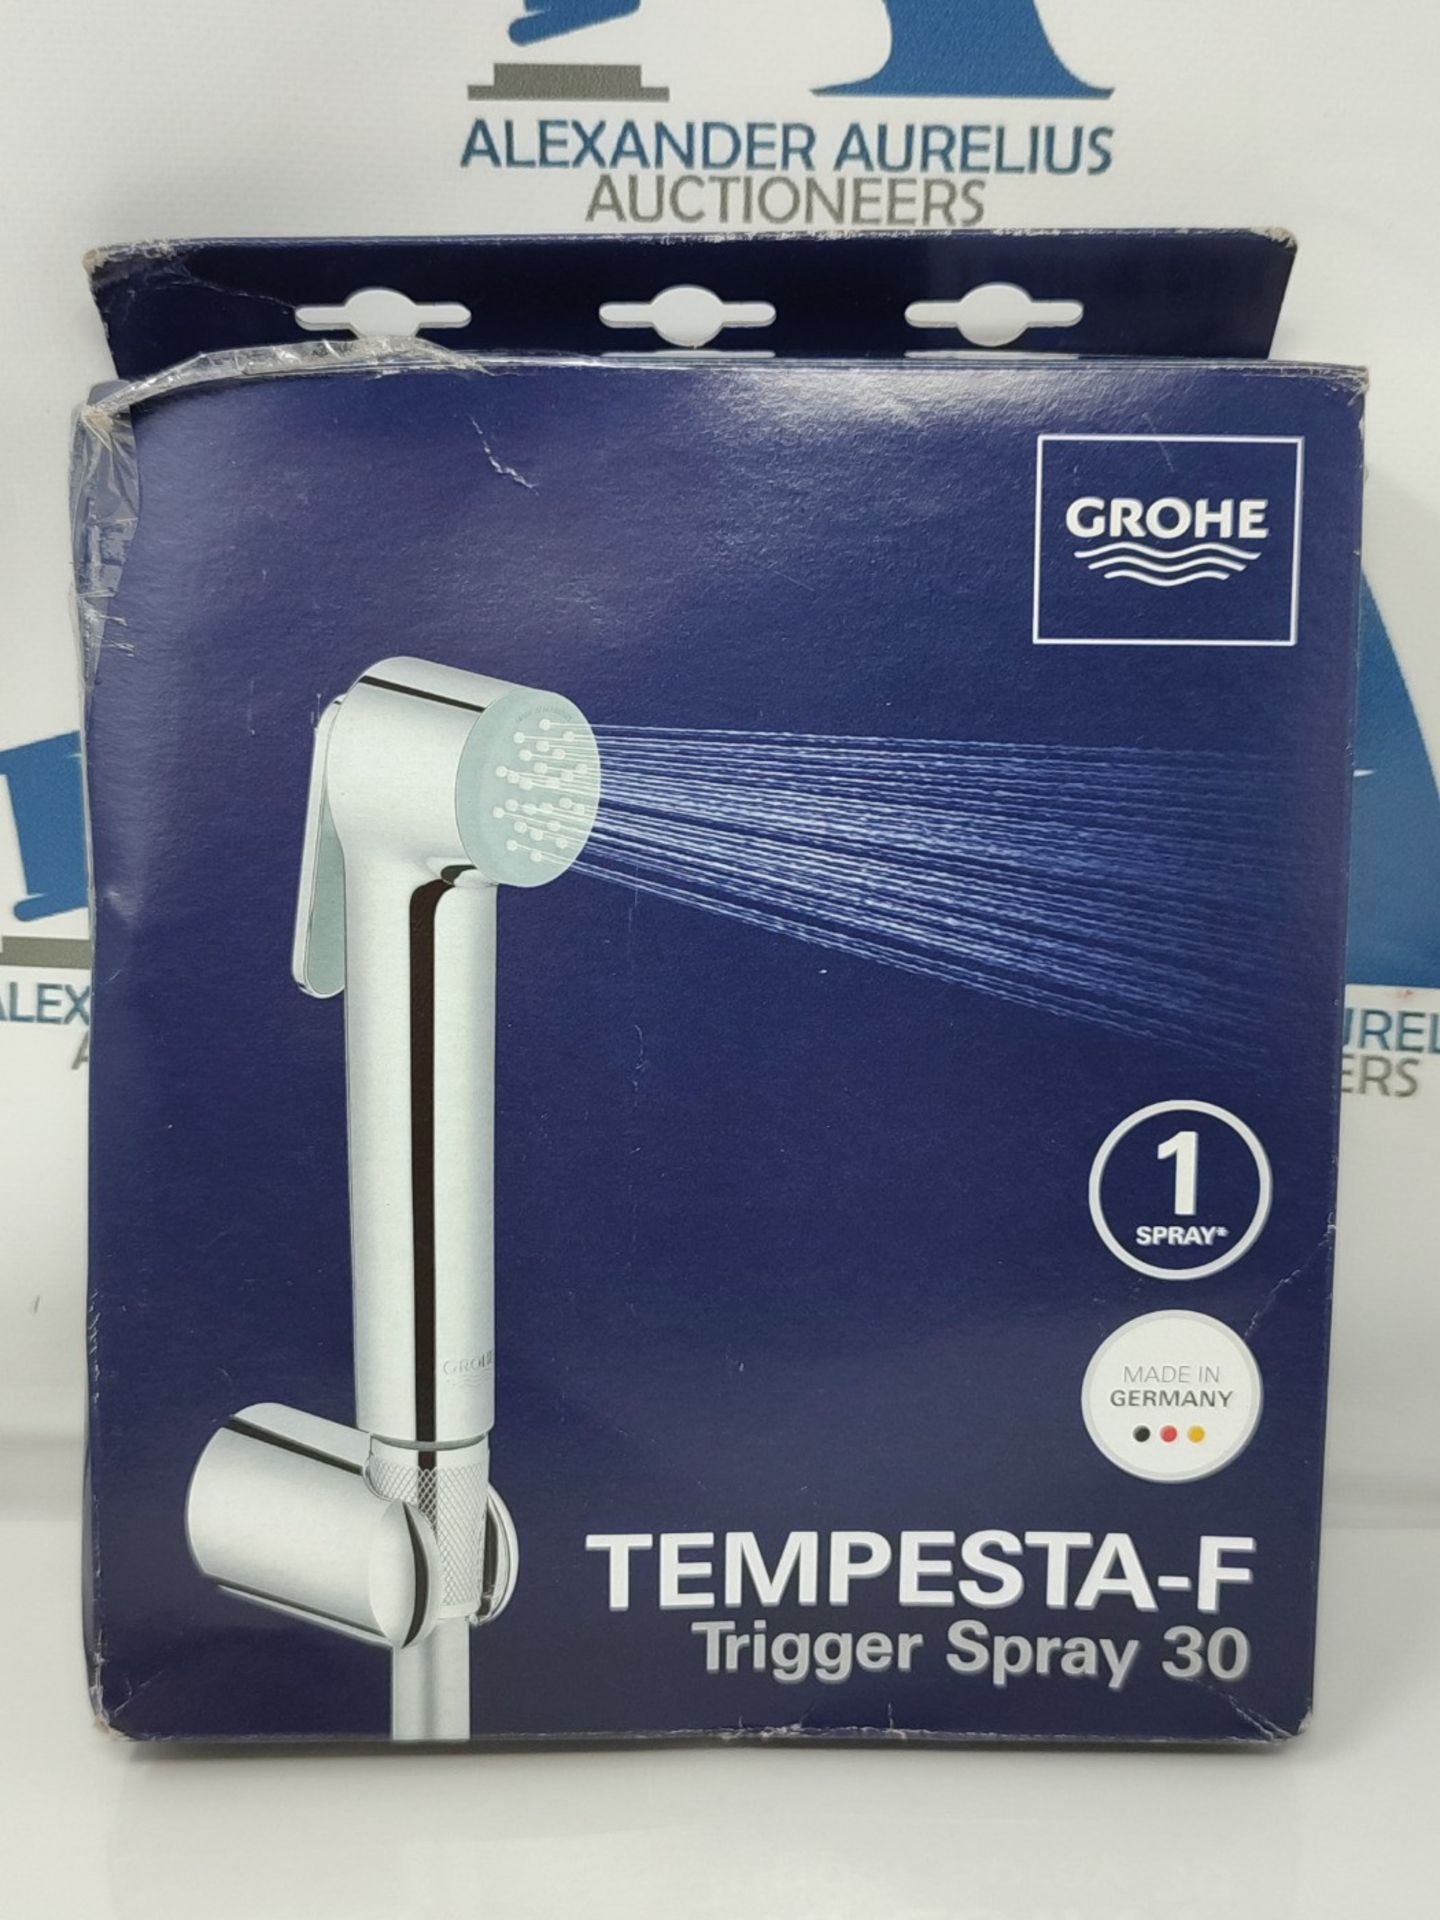 GROHE Tempesta-F Trigger Spray 30 - Wall Holder Set with Trigger-Control Hand Shower ( - Image 2 of 3